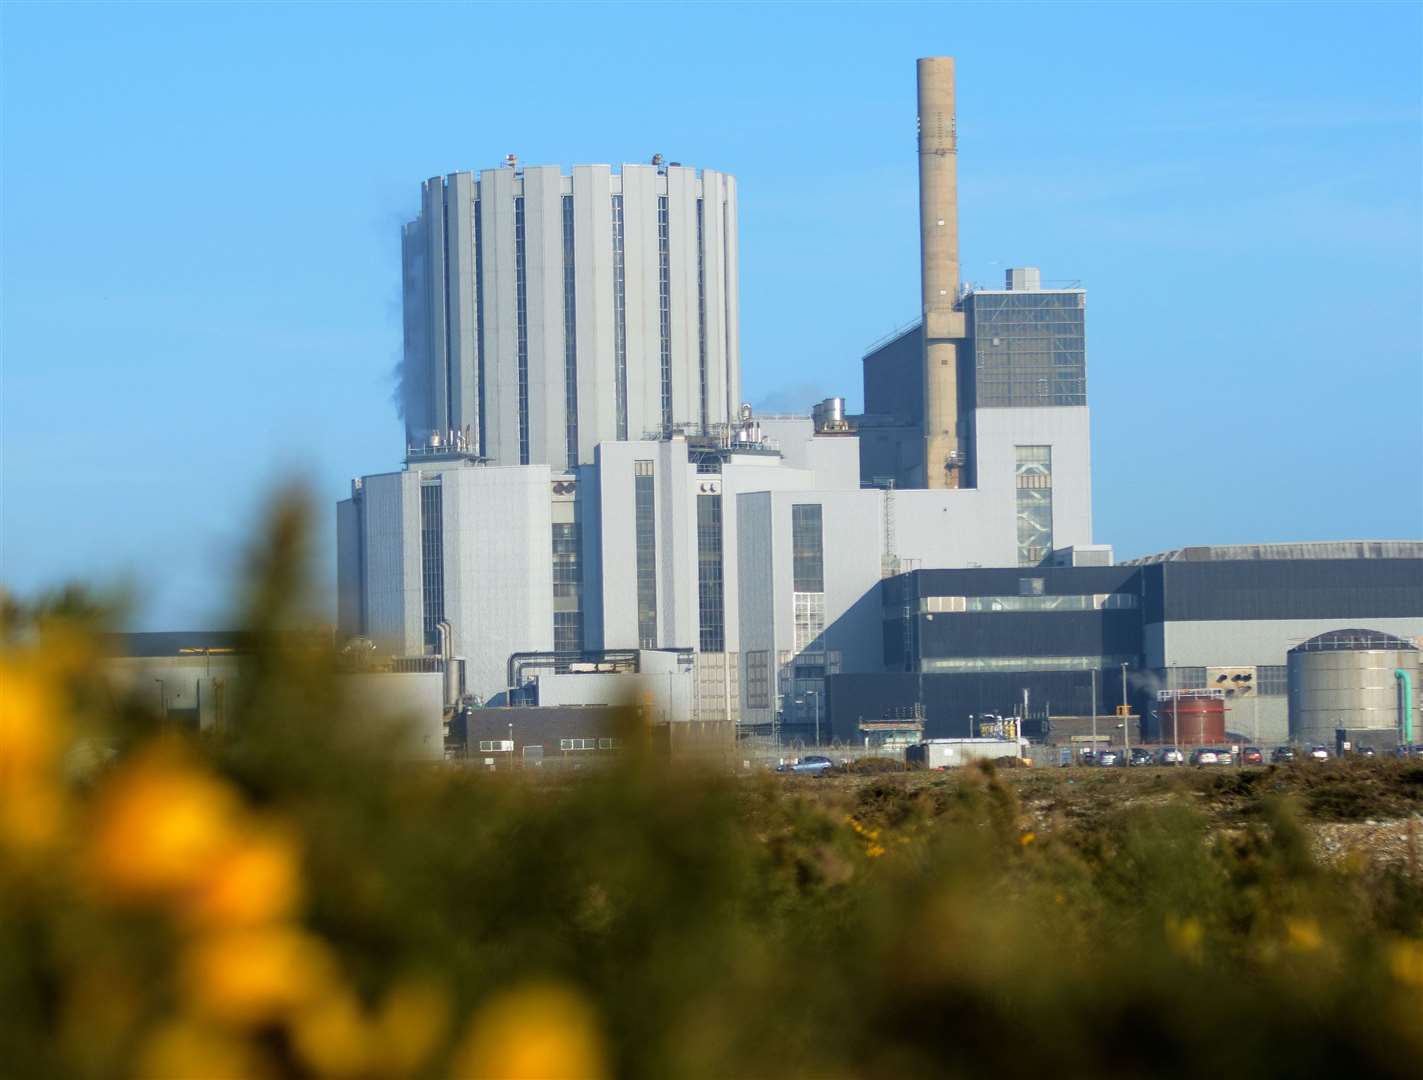 Dungeness B nuclear power station. (54640540)